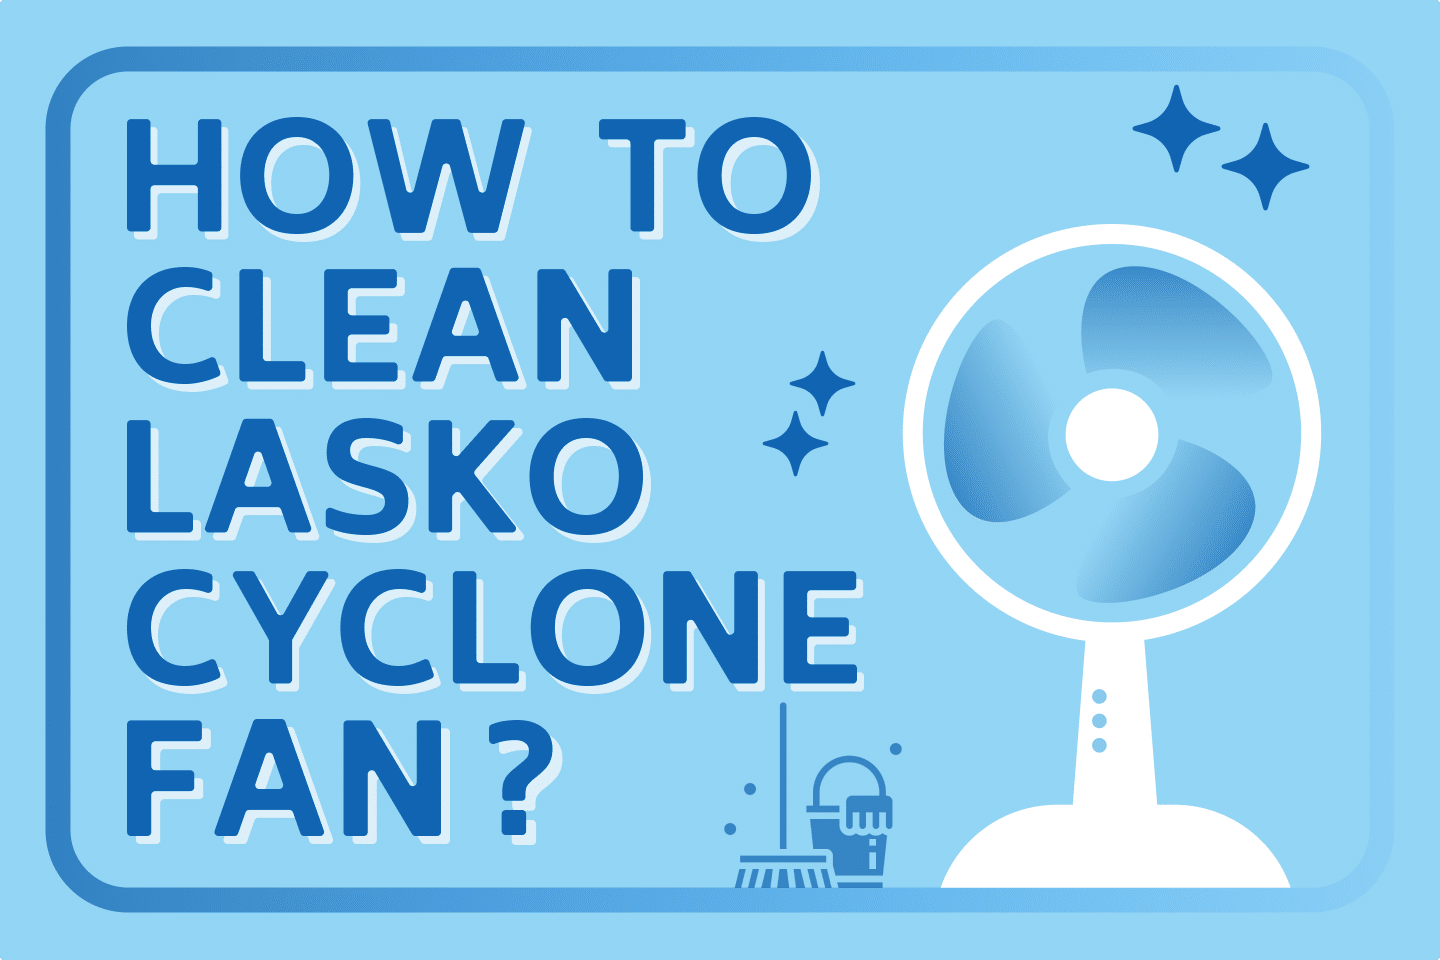 How To Clean Lasko Cyclone Fan [Step-by-Step Instructions]